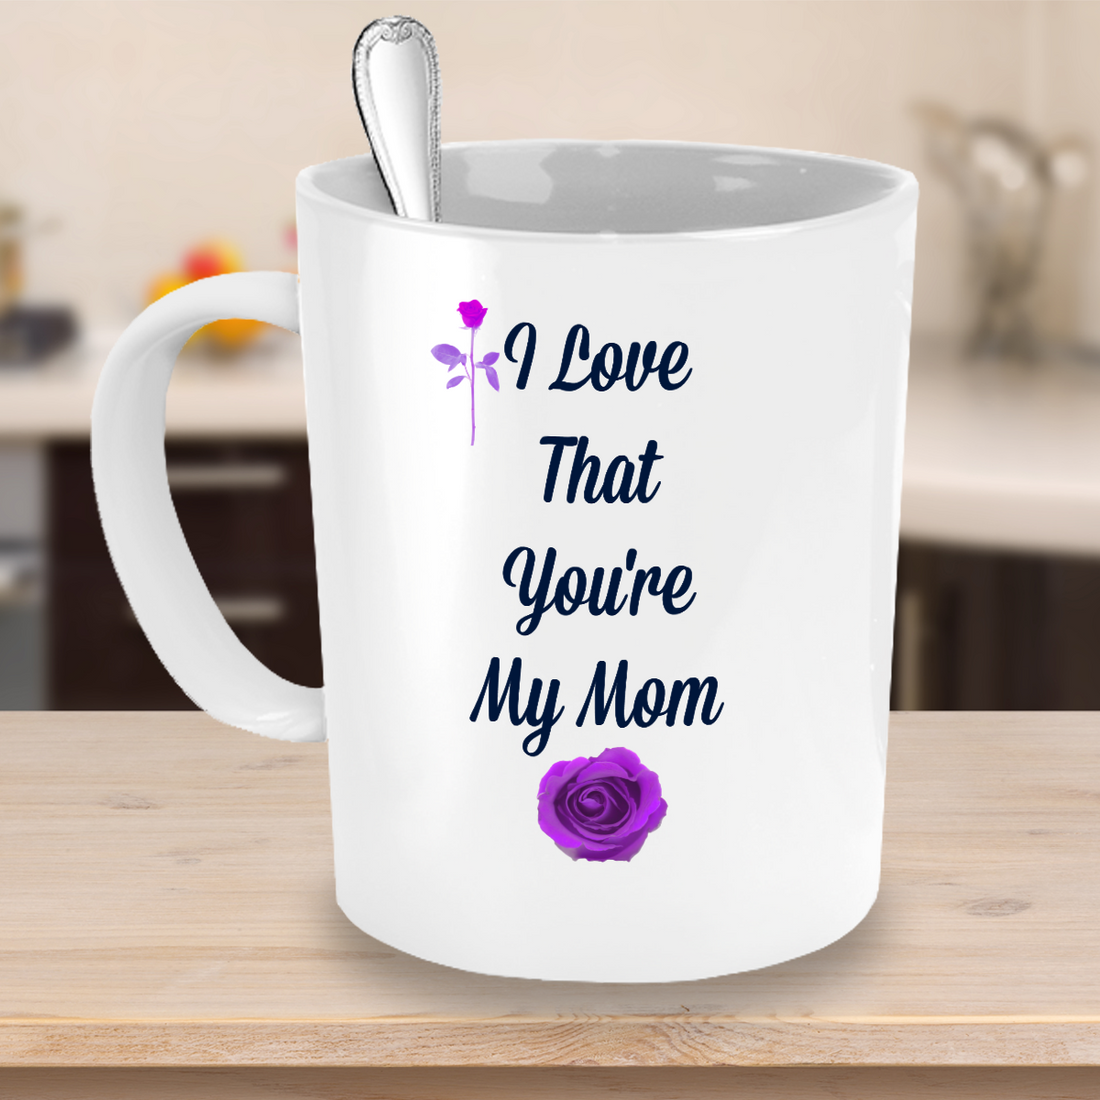 Mother's Day Gifts